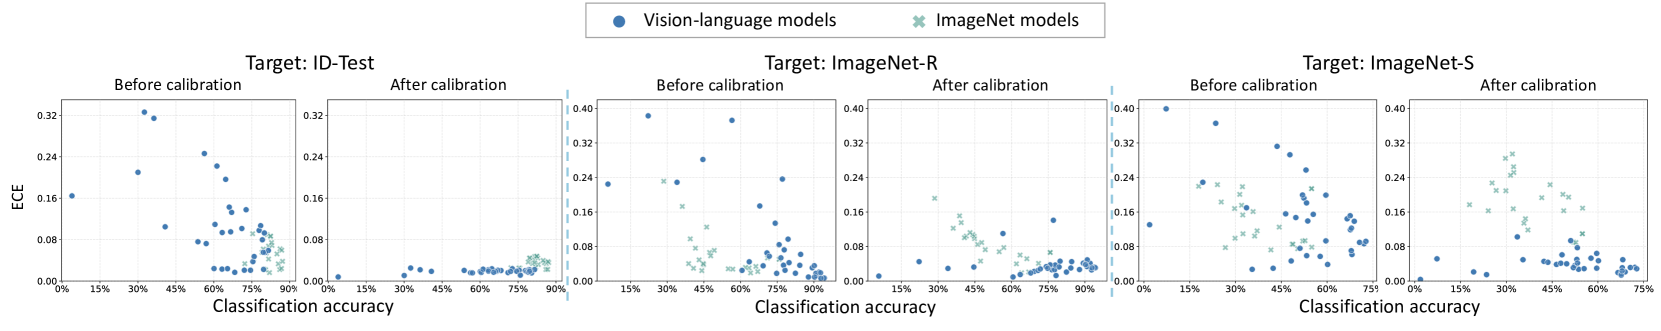 An Empirical Study Into What Matters for Calibrating Vision-Language Models